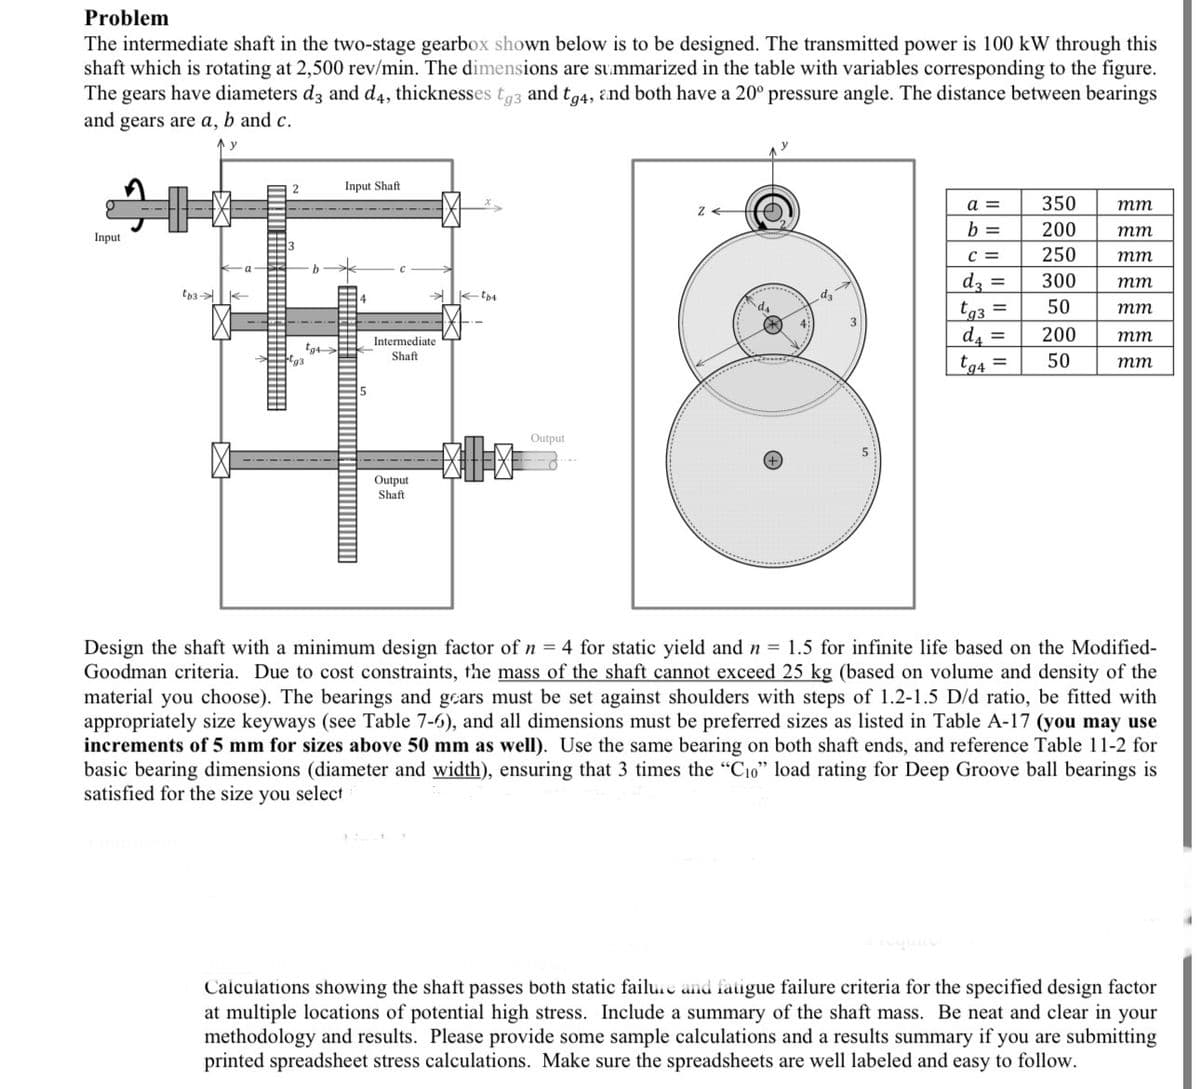 Problem
The intermediate shaft in the two-stage gearbox shown below is to be designed. The transmitted power is 100 kW through this
shaft which is rotating at 2,500 rev/min. The dimensions are summarized in the table with variables corresponding to the figure.
The gears have diameters d3 and d4, thicknesses tg3 and tg4, and both have a 20° pressure angle. The distance between bearings
and gears are a, b and c.
^y
Input
tb3
2
g3
b
tg4
Input Shaft
→
Intermediate
Shaft
Output
Shaft
K-tb4
Output
Z
4;
dz
3
a =
b =
C =
d3 =
tg3 =
d4 =
tg4 =
-
350
200
250
300
50
200
50
mm
mm
mm
mm
mm
mm
▬▬▬▬▬▬▬▬
mm
Design the shaft with a minimum design factor of n = 4 for static yield and n = 1.5 for infinite life based on the Modified-
Goodman criteria. Due to cost constraints, the mass of the shaft cannot exceed 25 kg (based on volume and density of the
material you choose). The bearings and gears must be set against shoulders with steps of 1.2-1.5 D/d ratio, be fitted with
appropriately size keyways (see Table 7-6), and all dimensions must be preferred sizes as listed in Table A-17 (you may use
increments of 5 mm for sizes above 50 mm as well). Use the same bearing on both shaft ends, and reference Table 11-2 for
basic bearing dimensions (diameter and width), ensuring that 3 times the "Cio" load rating for Deep Groove ball bearings is
satisfied for the size you select
Calculations showing the shaft passes both static failure and fatigue failure criteria for the specified design factor
at multiple locations of potential high stress. Include a summary of the shaft mass. Be neat and clear in your
methodology and results. Please provide some sample calculations and a results summary if you are submitting
printed spreadsheet stress calculations. Make sure the spreadsheets are well labeled and easy to follow.